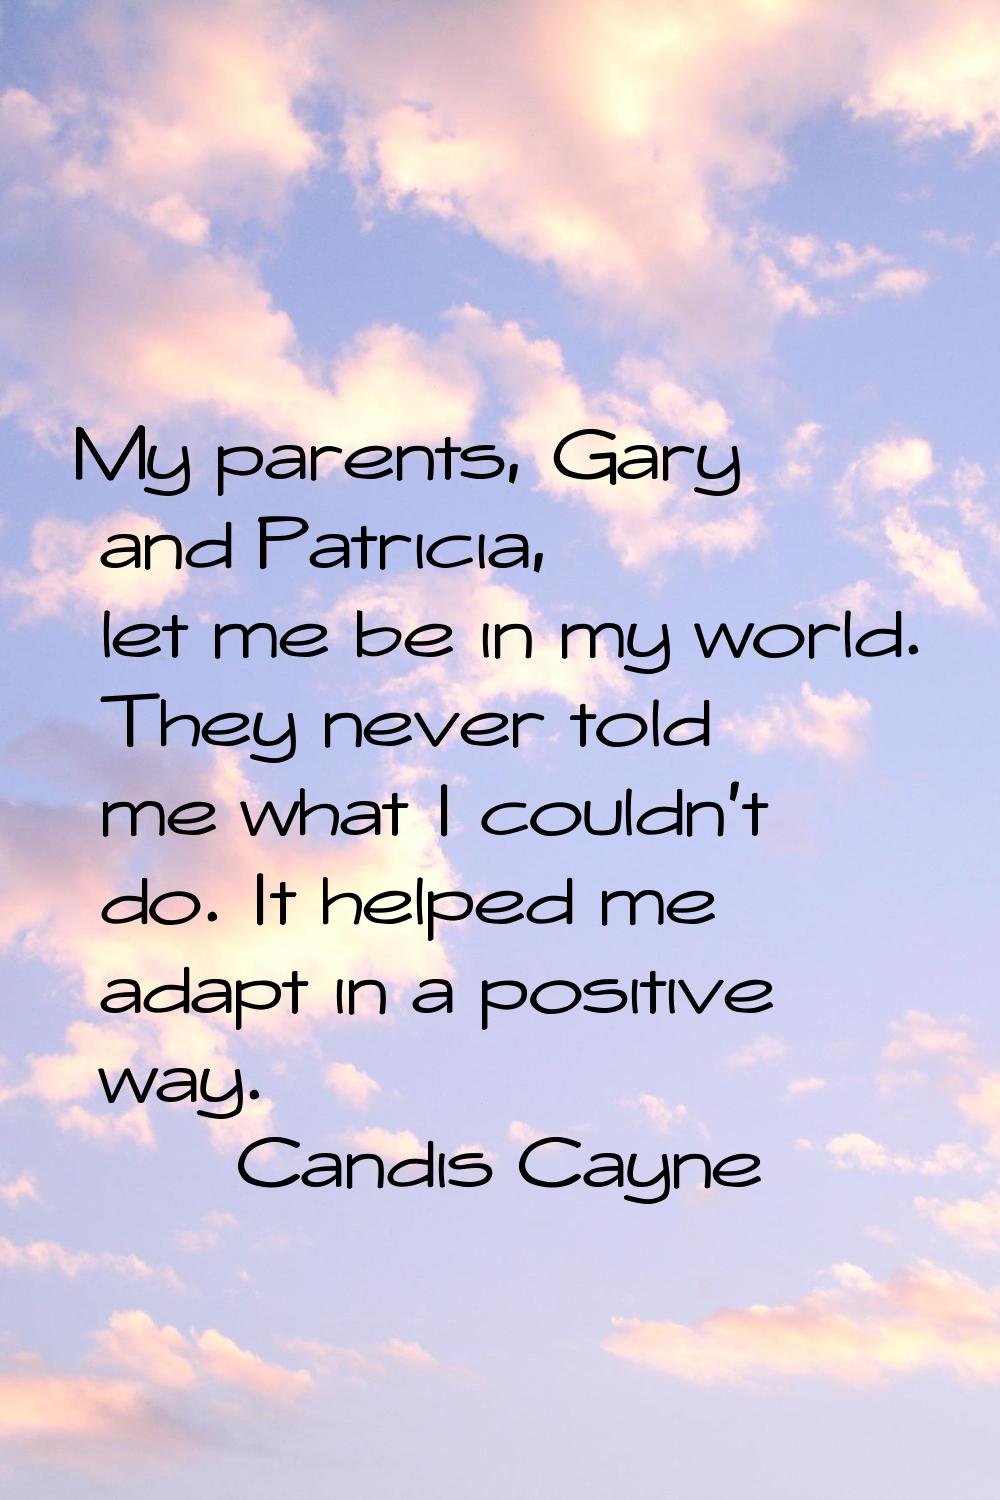 My parents, Gary and Patricia, let me be in my world. They never told me what I couldn't do. It hel